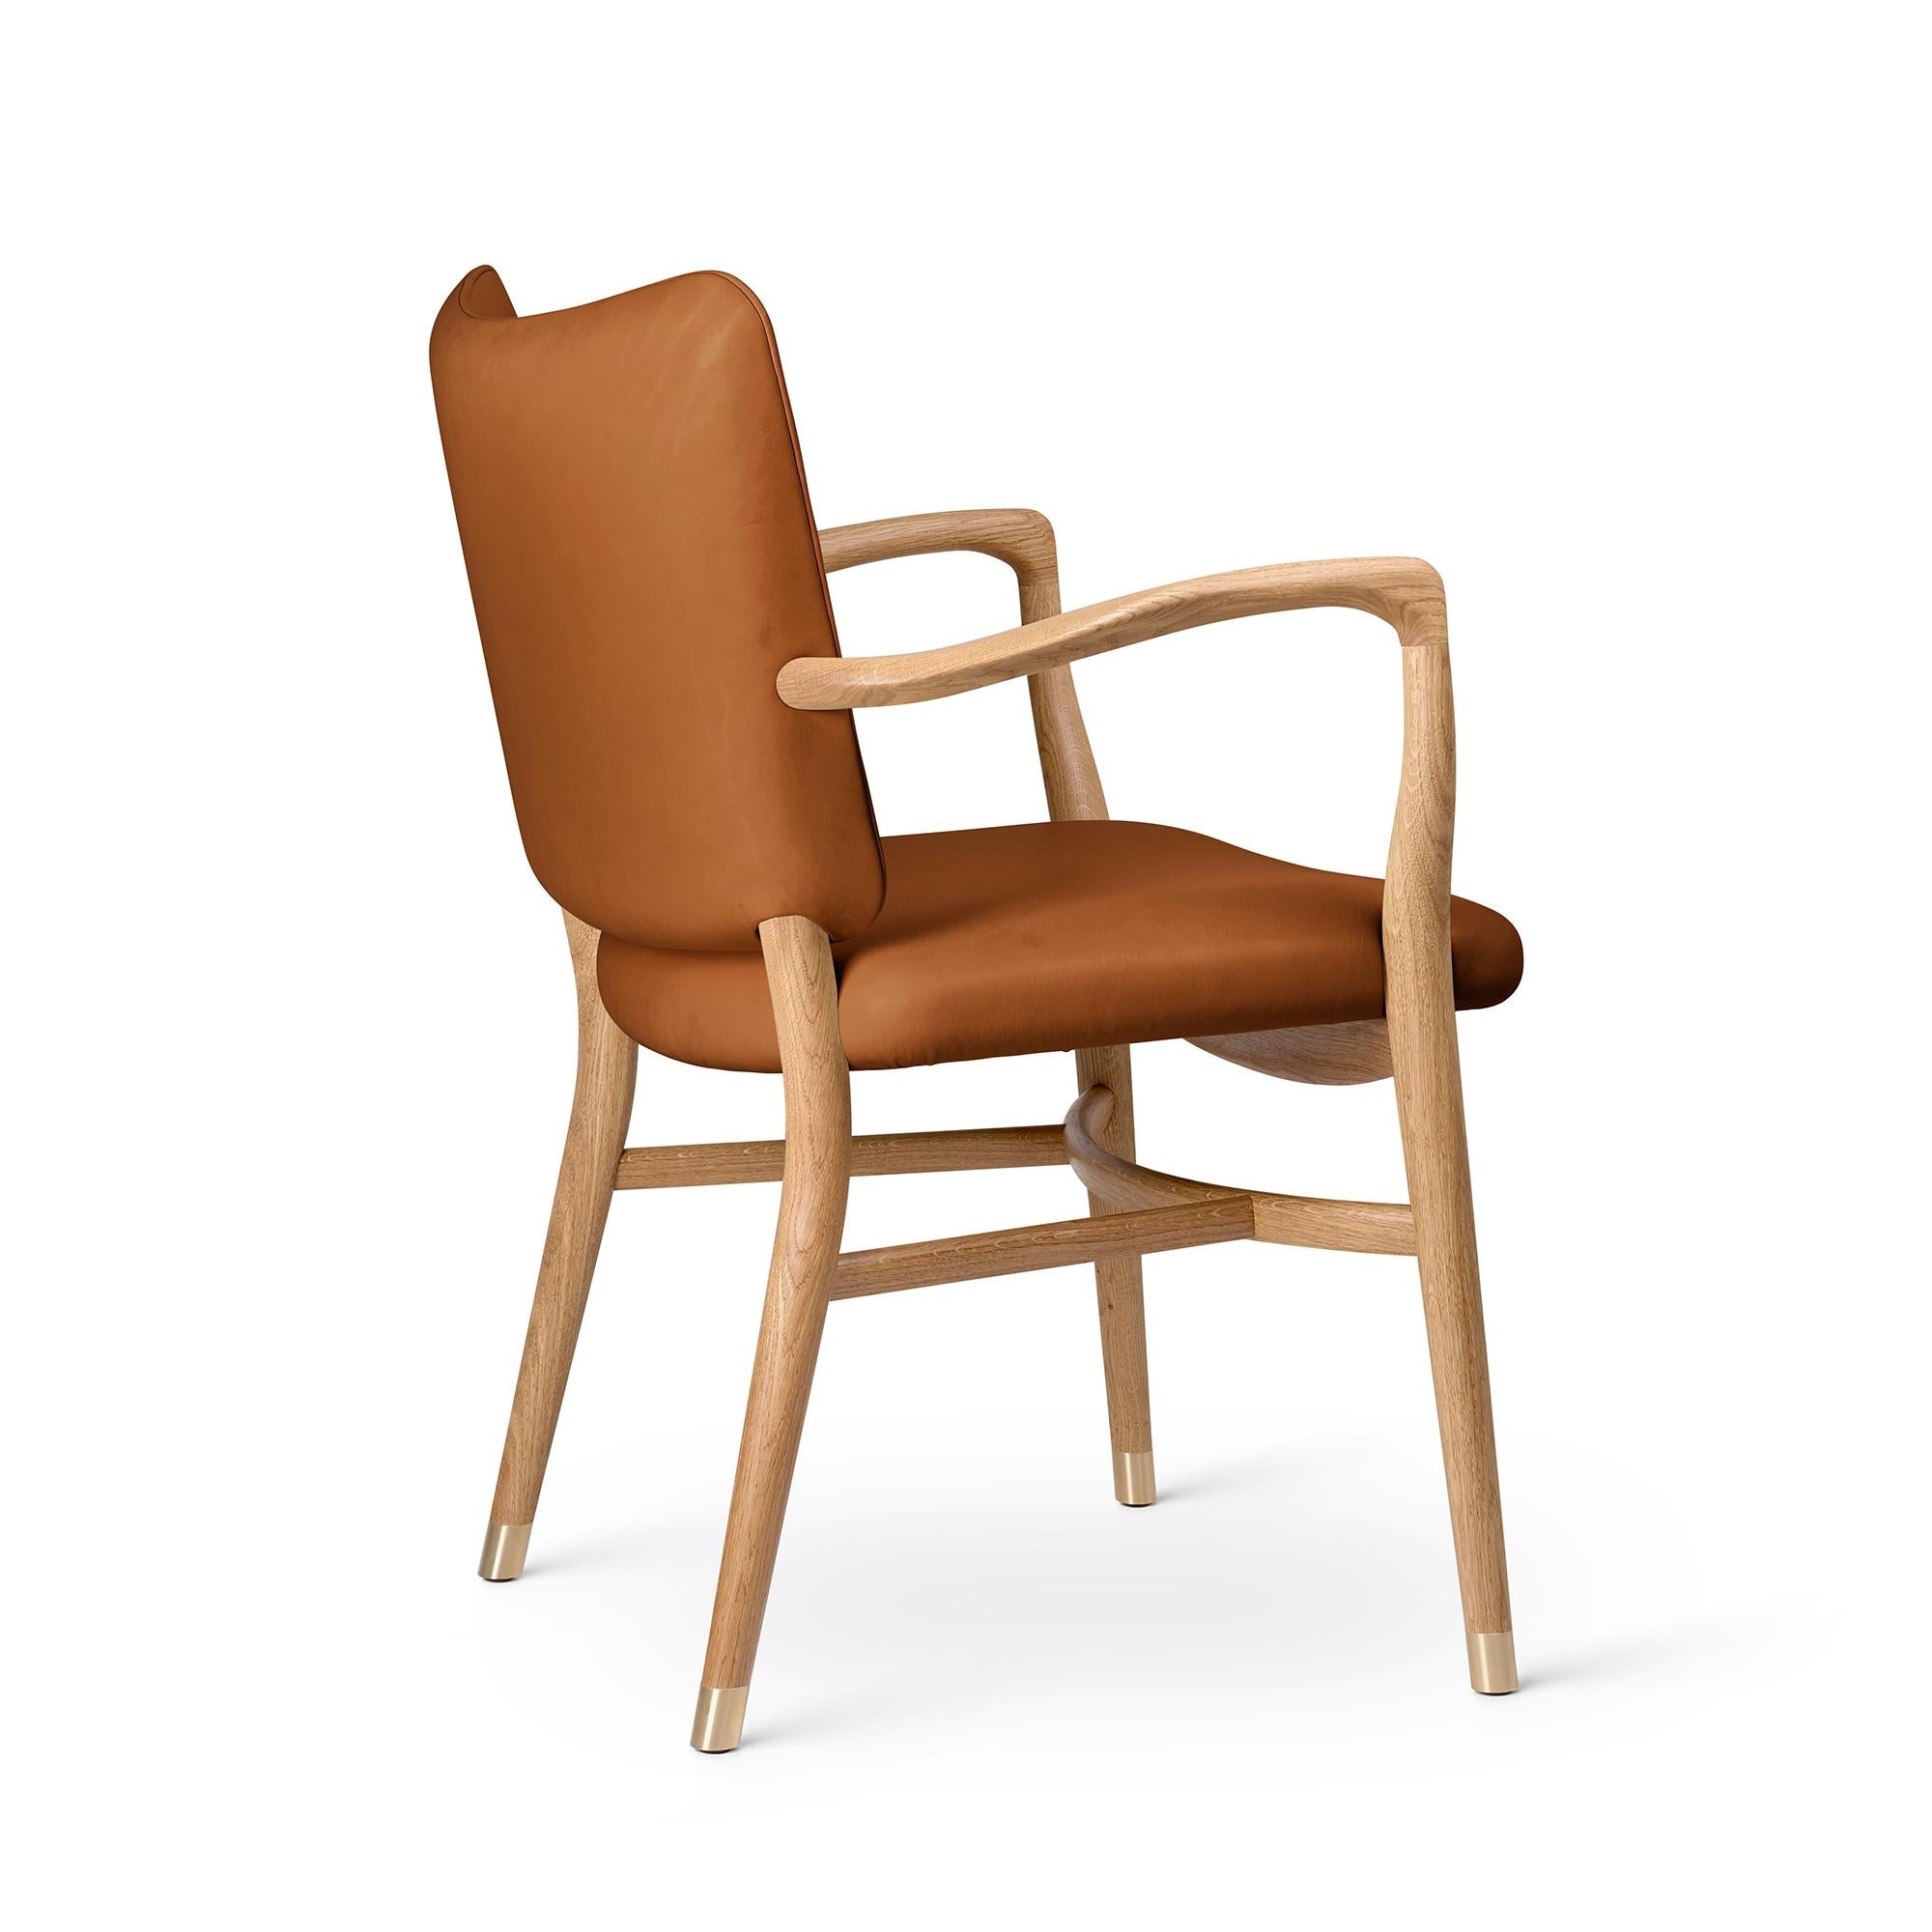 Vilhelm Lauritzen 'VLA61' Chair in Oak Oil and Leather for Carl Hansen & Son.

The story of Danish Modern begins in 1908 when Carl Hansen opened his first workshop. His firm commitment to beauty, comfort, refinement, and craftsmanship is evident in